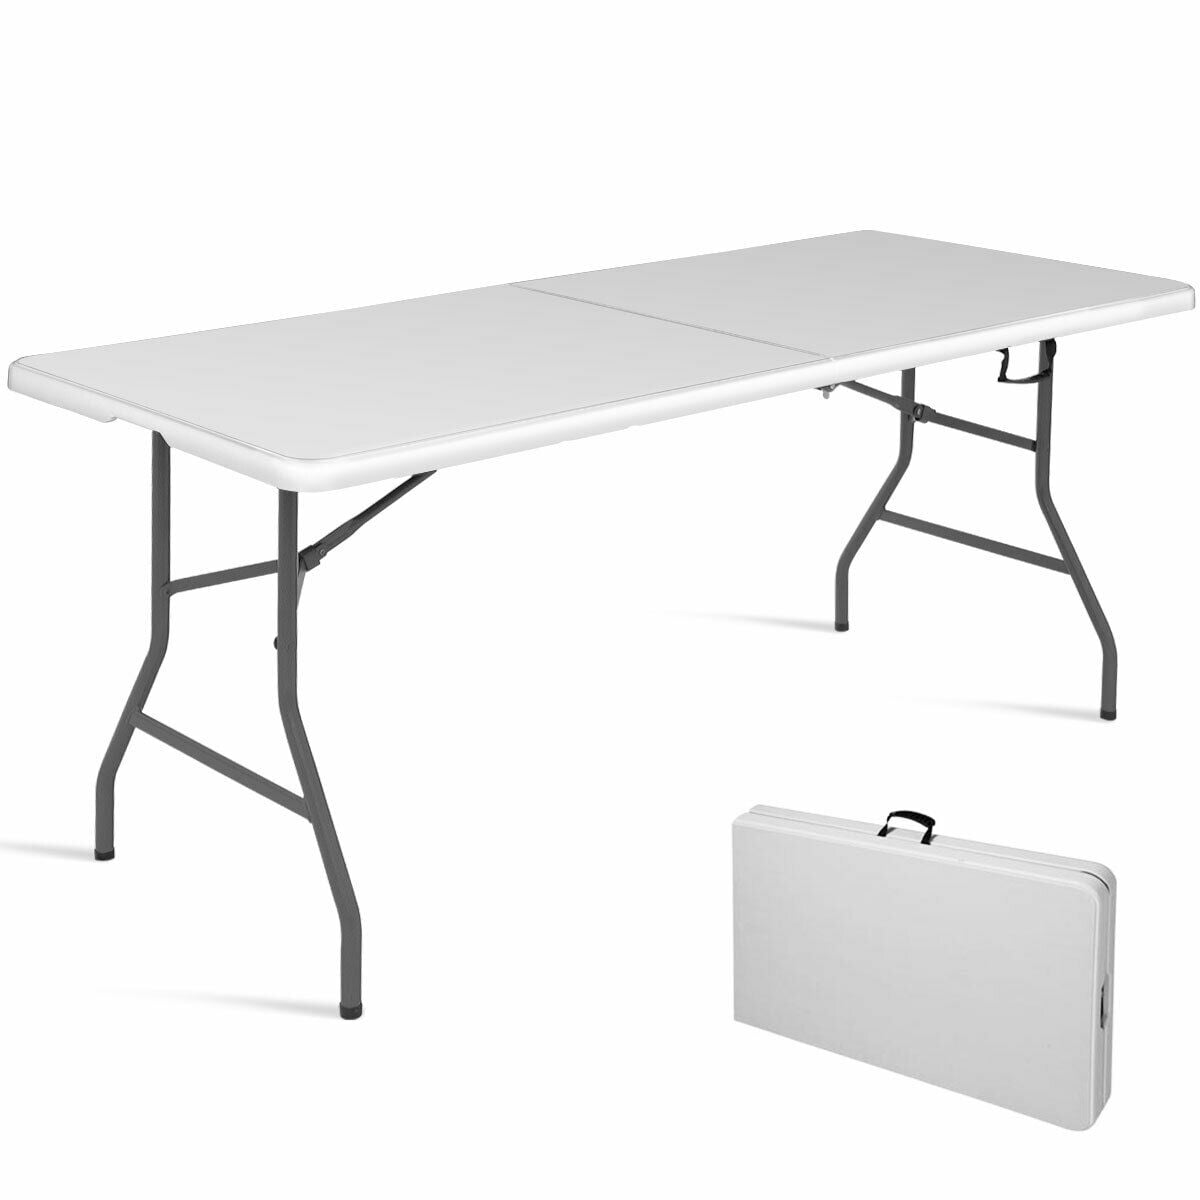 6' Folding Table Portable Plastic Indoor Outdoor Picnic ...